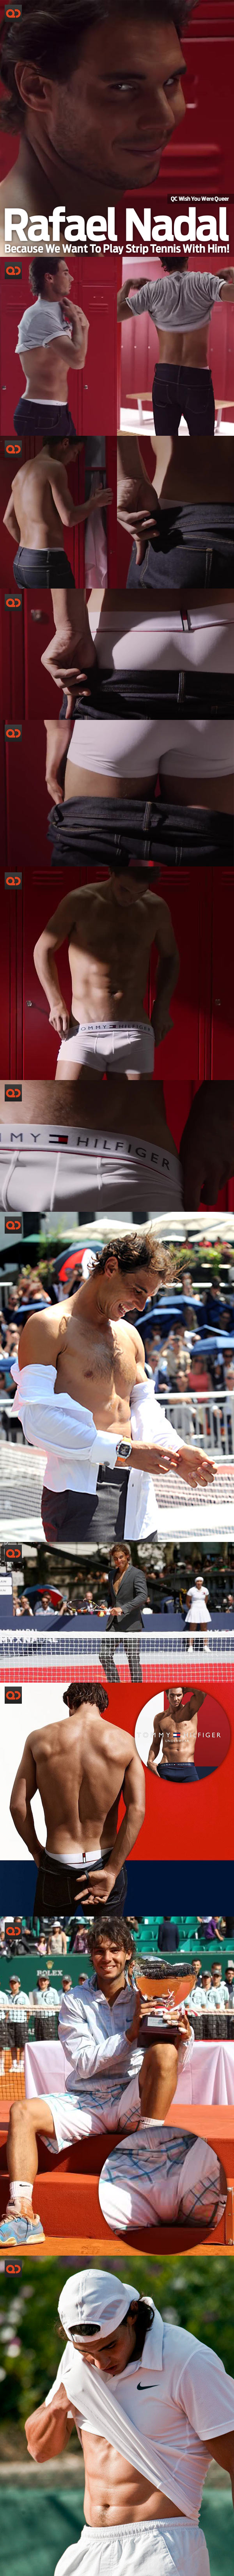 QC's Wish You Were Queer: Rafael Nadal - Because We Want To Play Strip Tennis With Him!